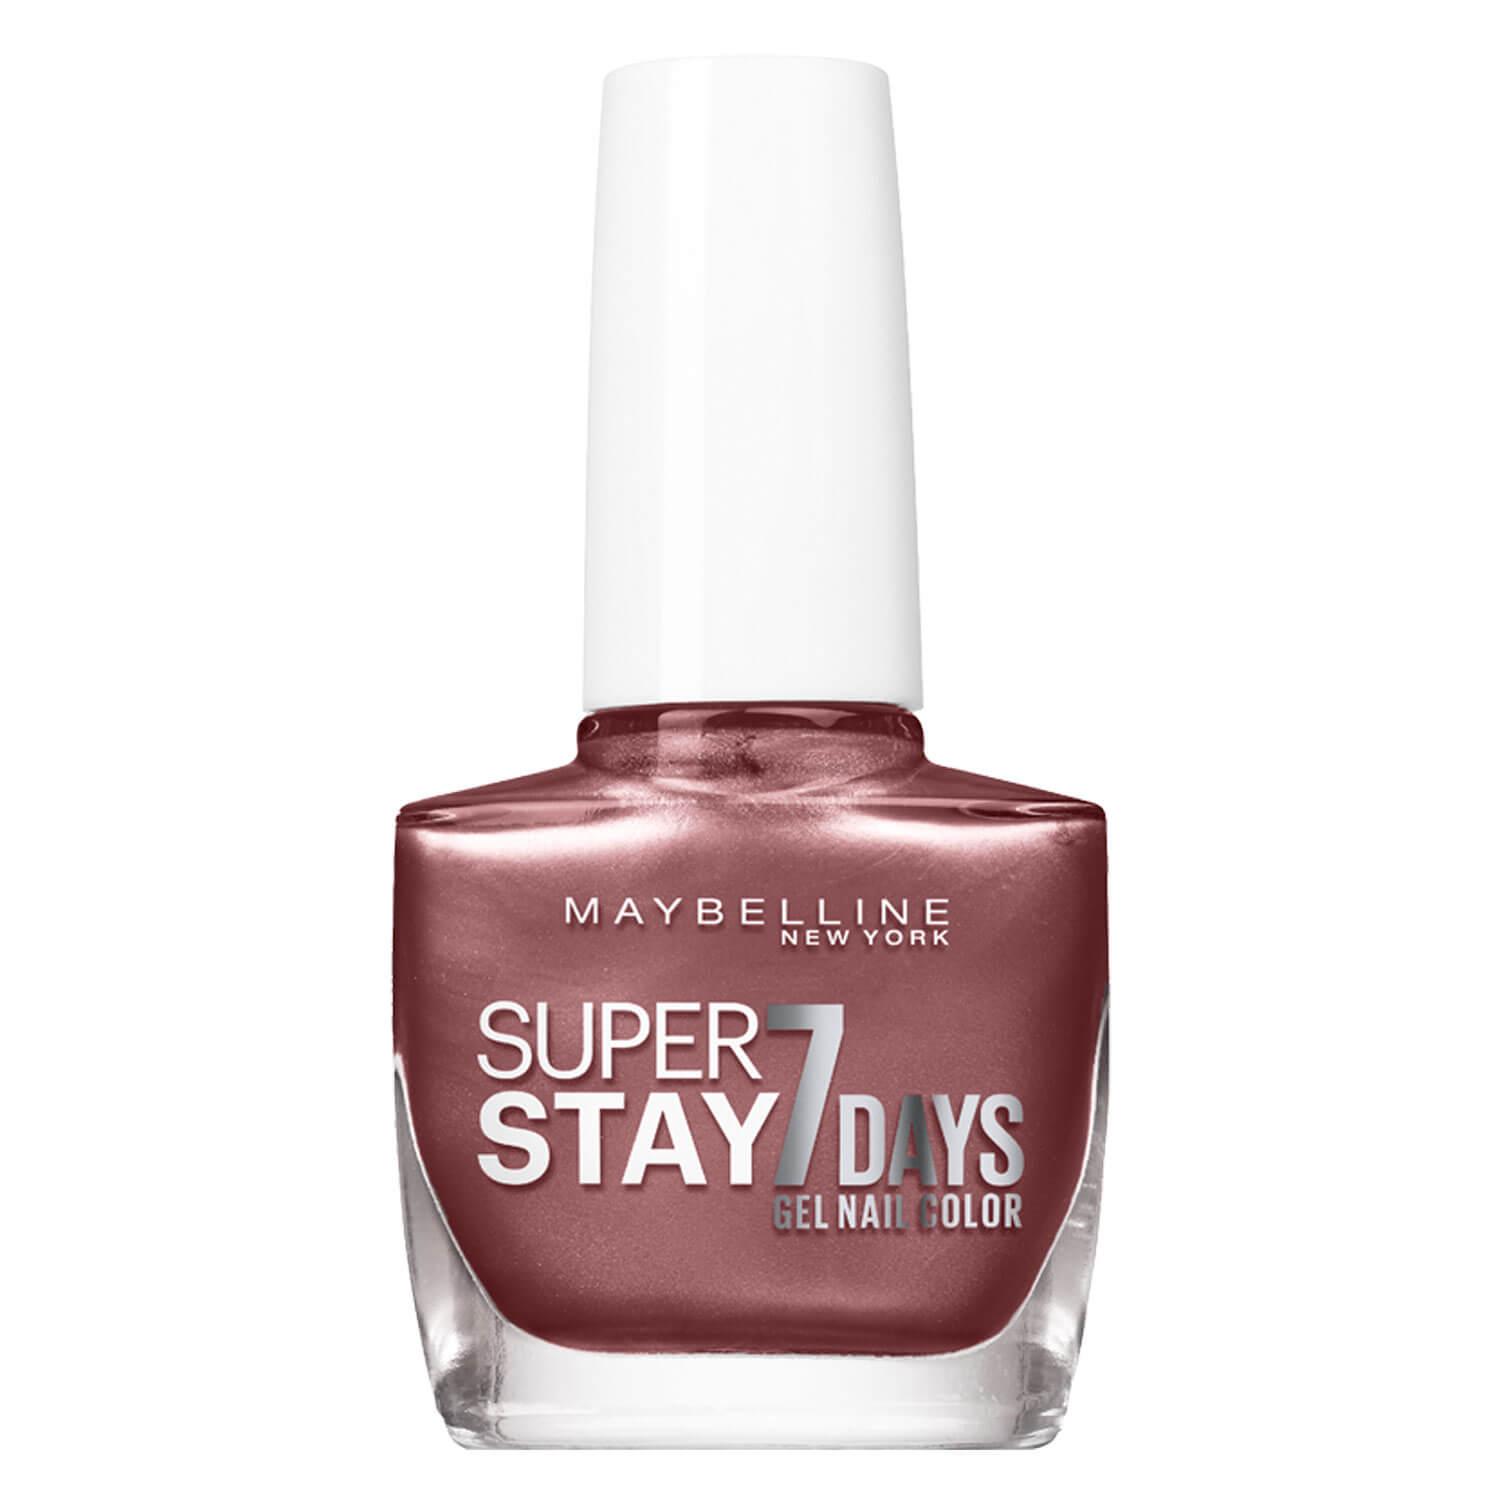 Maybelline NY Nails - Super Stay 7 Days Nagellack Nr. 912 Rooftop Shade